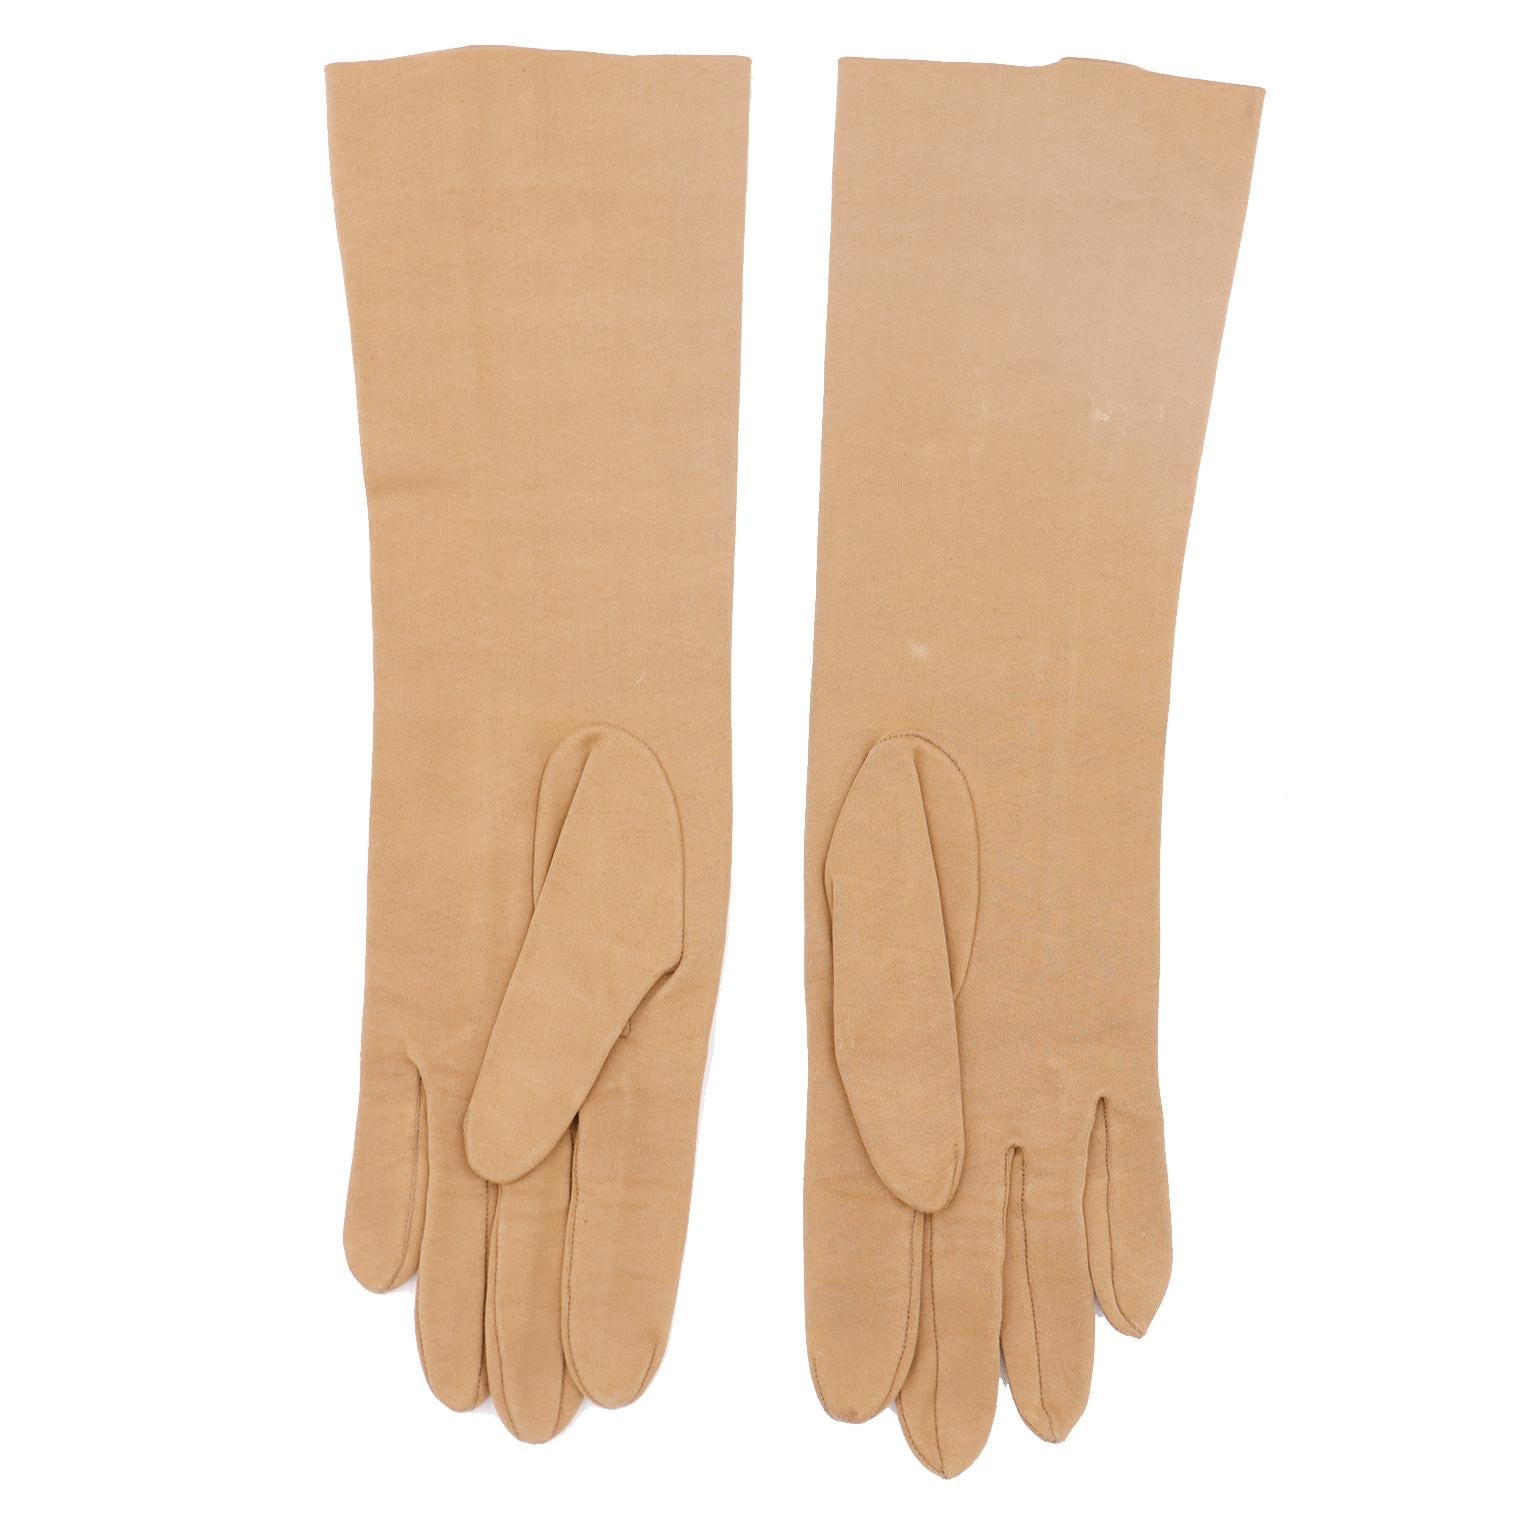 This is a lovely pair of vintage Christian Dior Sea Island cotton gloves from the 1970's. The gloves are in a pretty lighter brown beige color and were made in France. There is decorative top-stitching from the middle finger to the hem
- 1.5